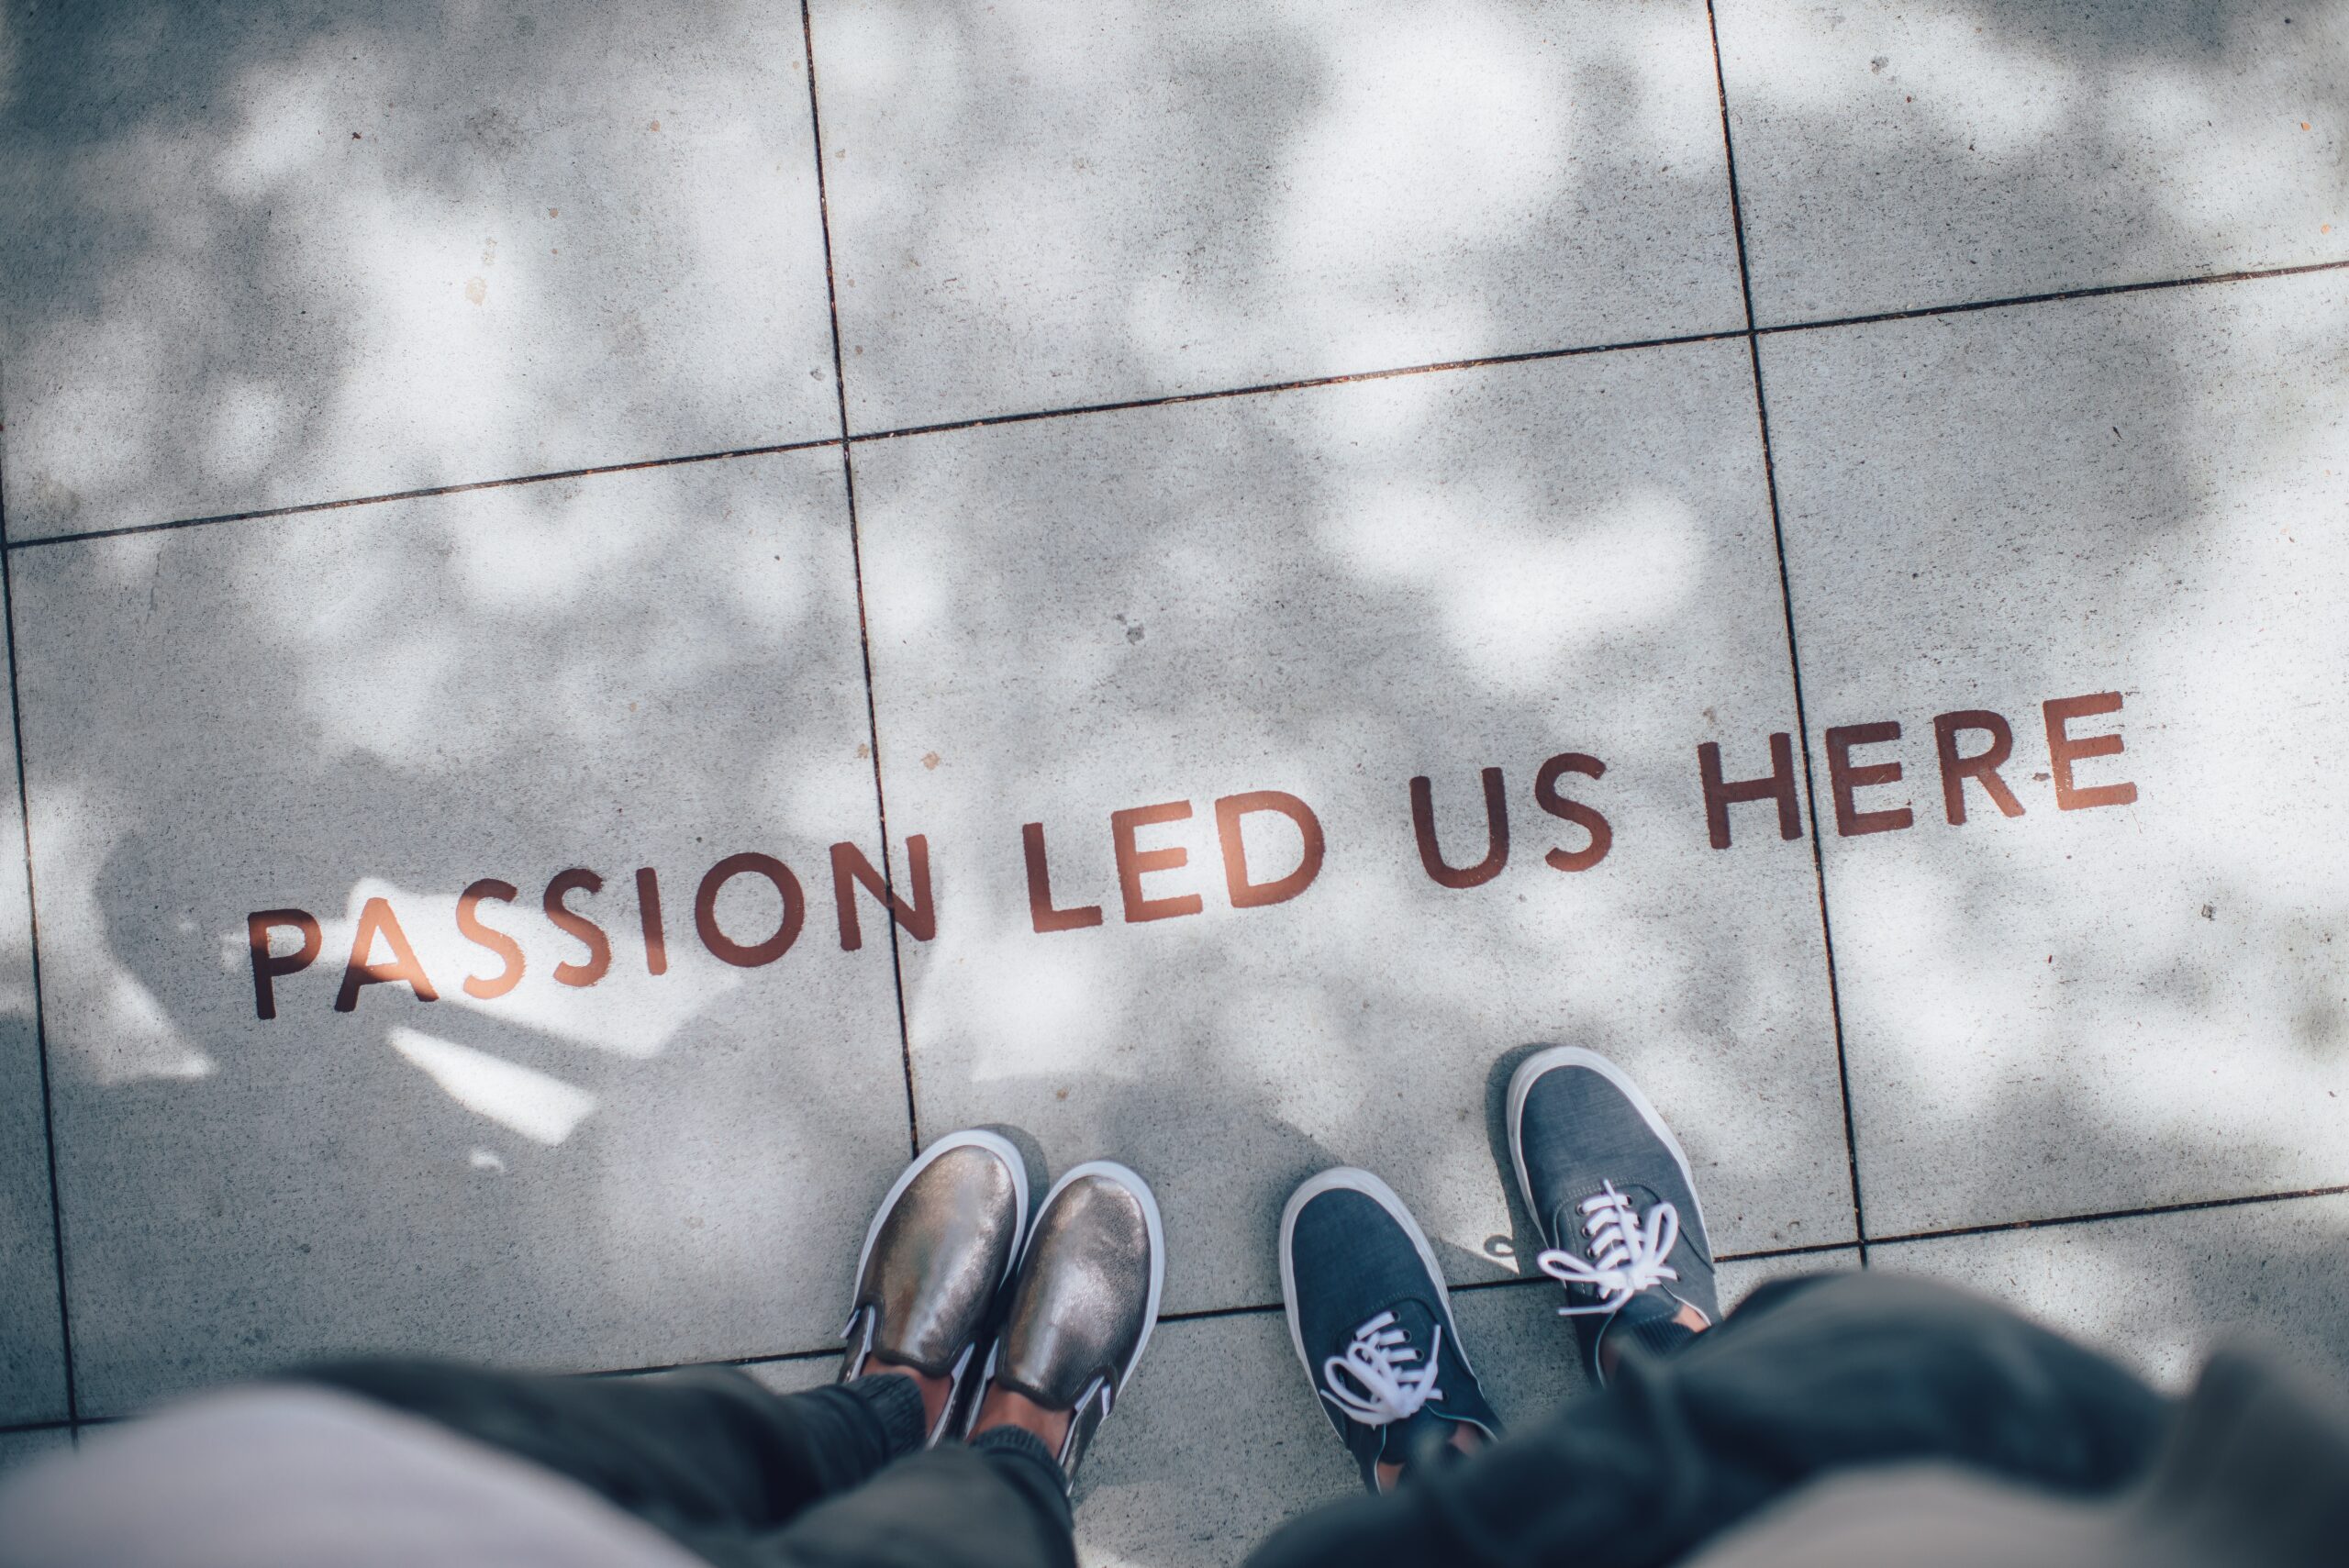 Feet on sidewalk with words, "Passion Led Us Here"